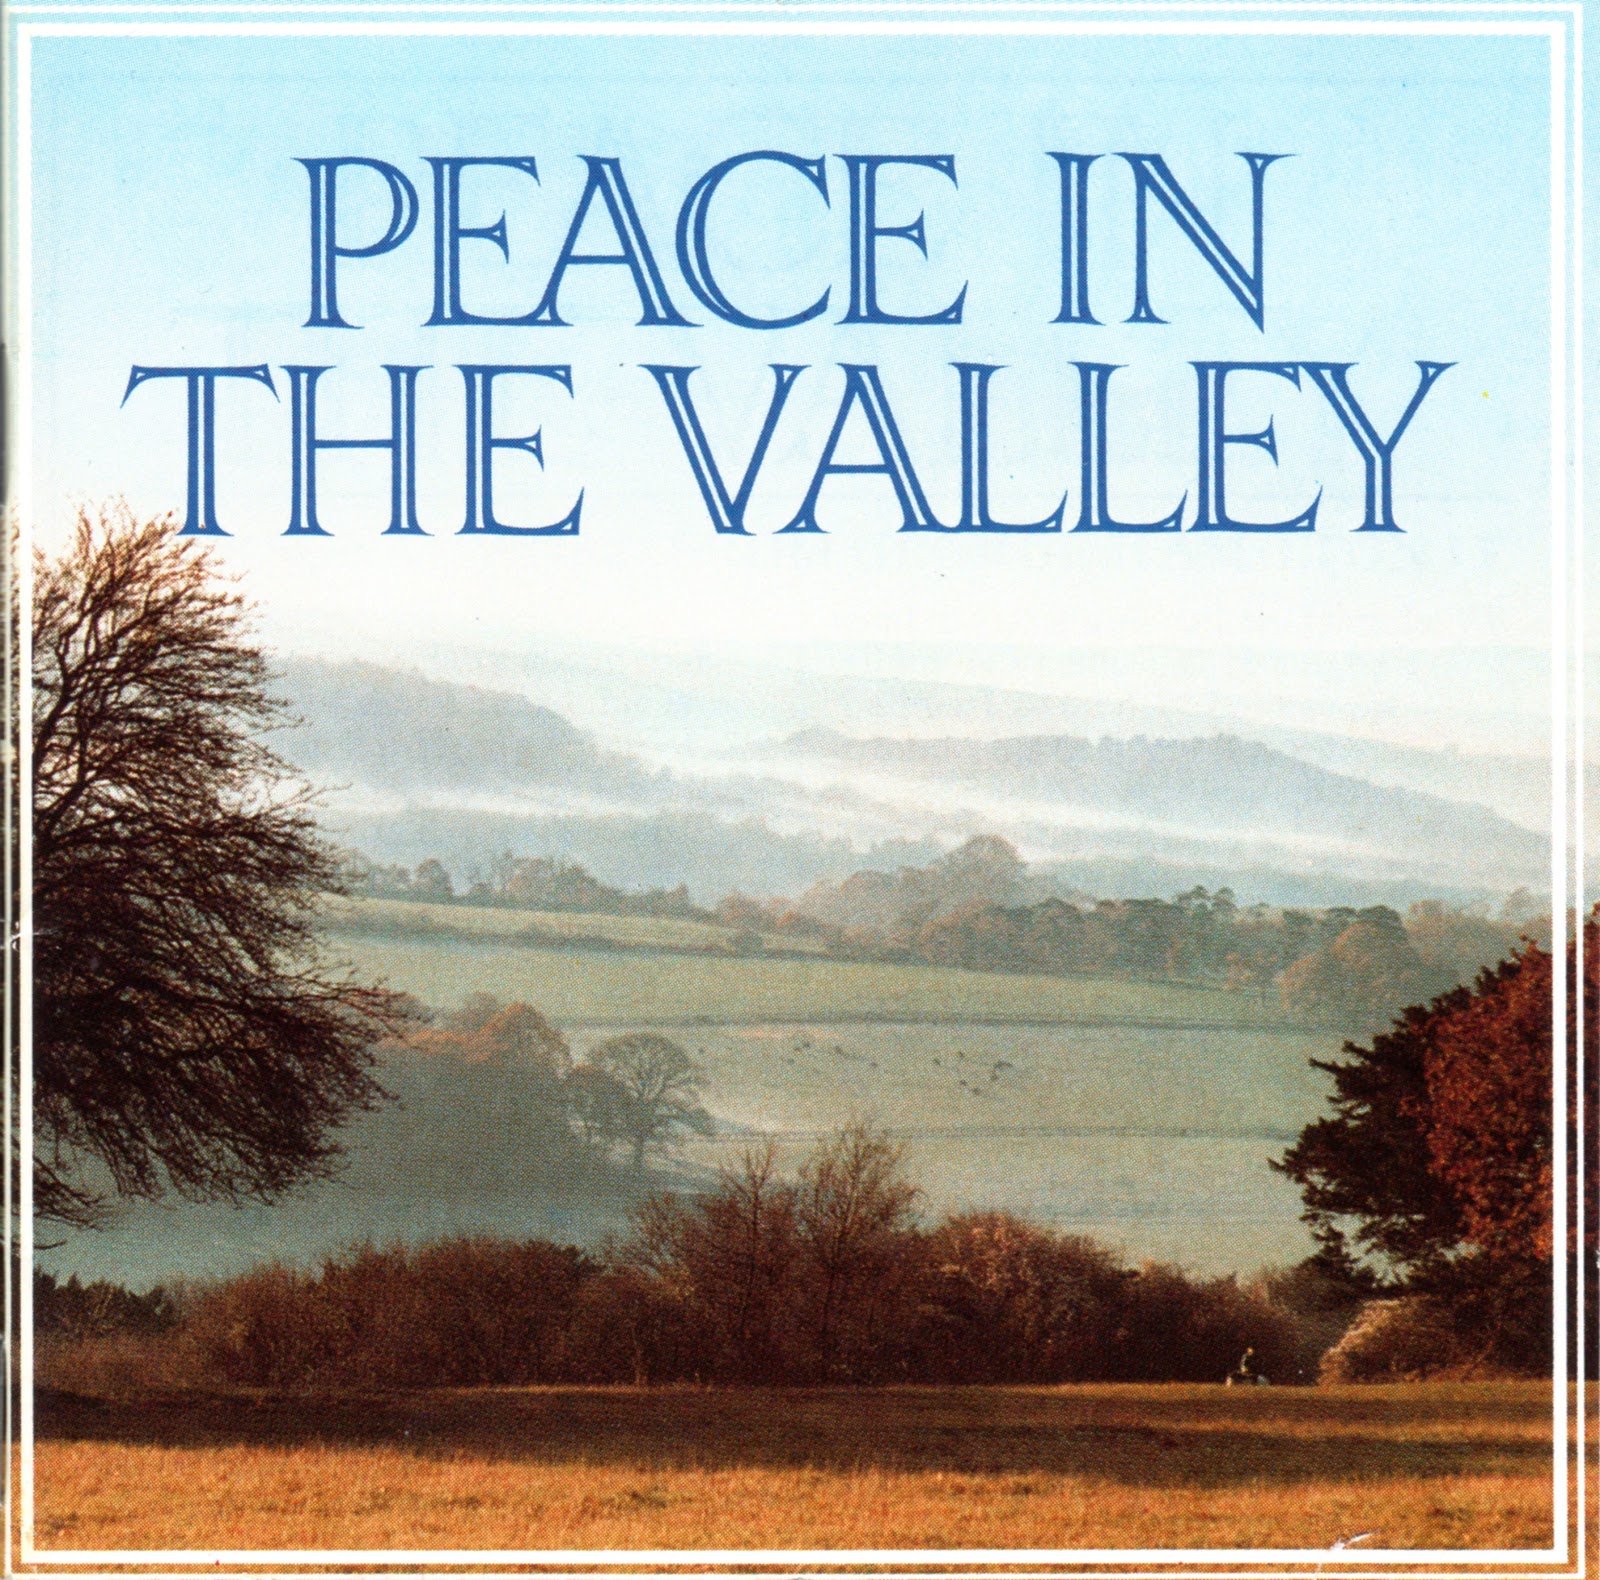 Peace in the valley tennessee ernie ford lyrics #6